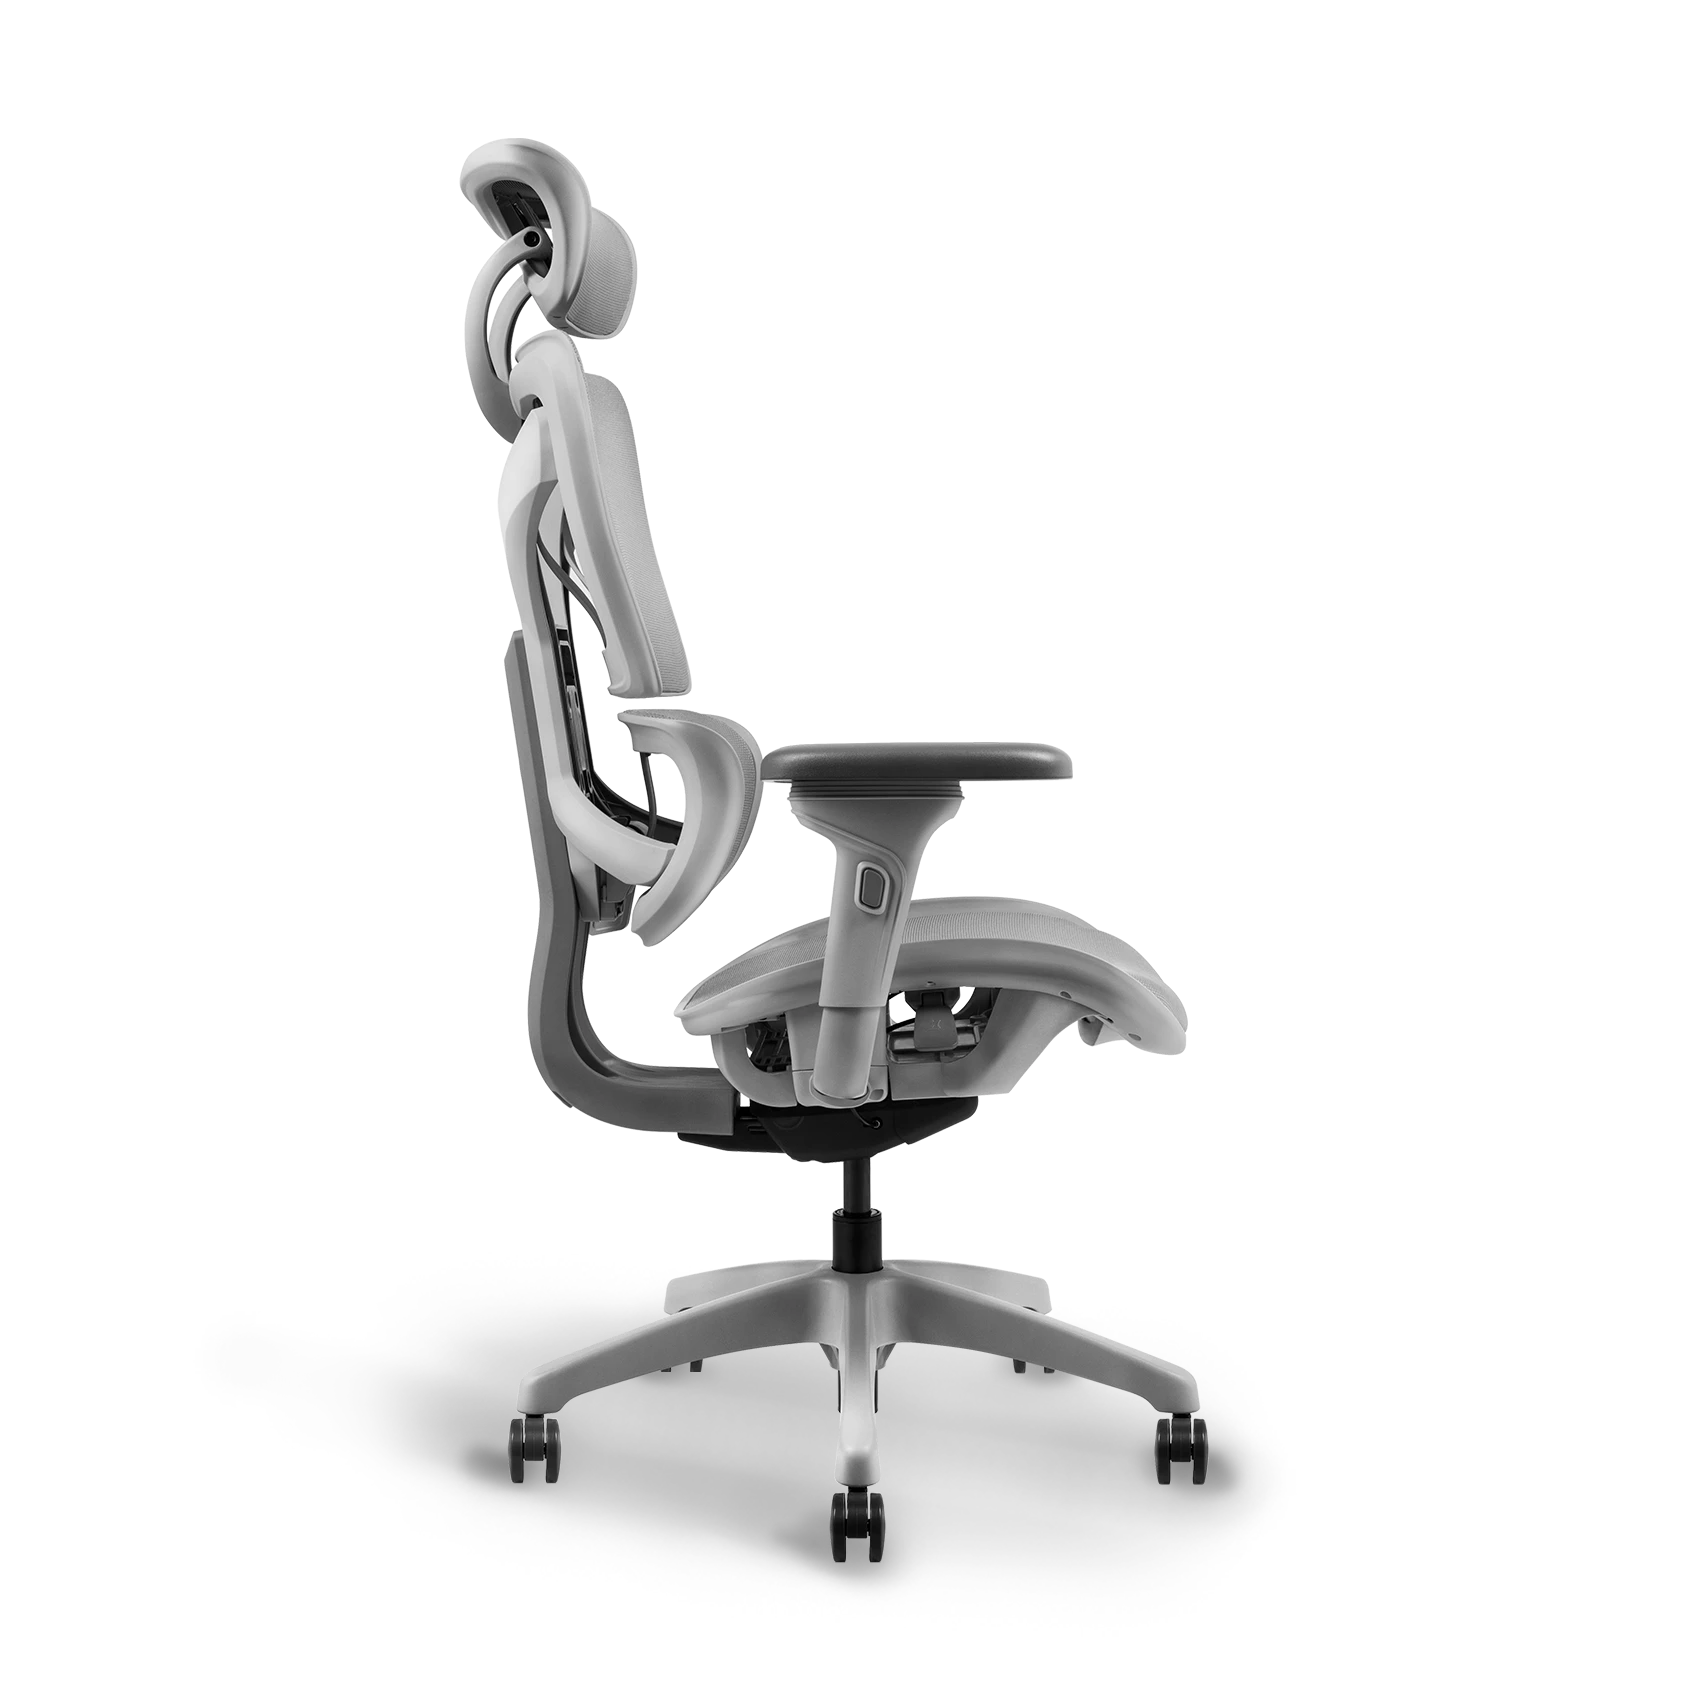 Side view of Flujo's ergonomic chair showing the contour and height adjustment mechanisms for tailored seating experience.